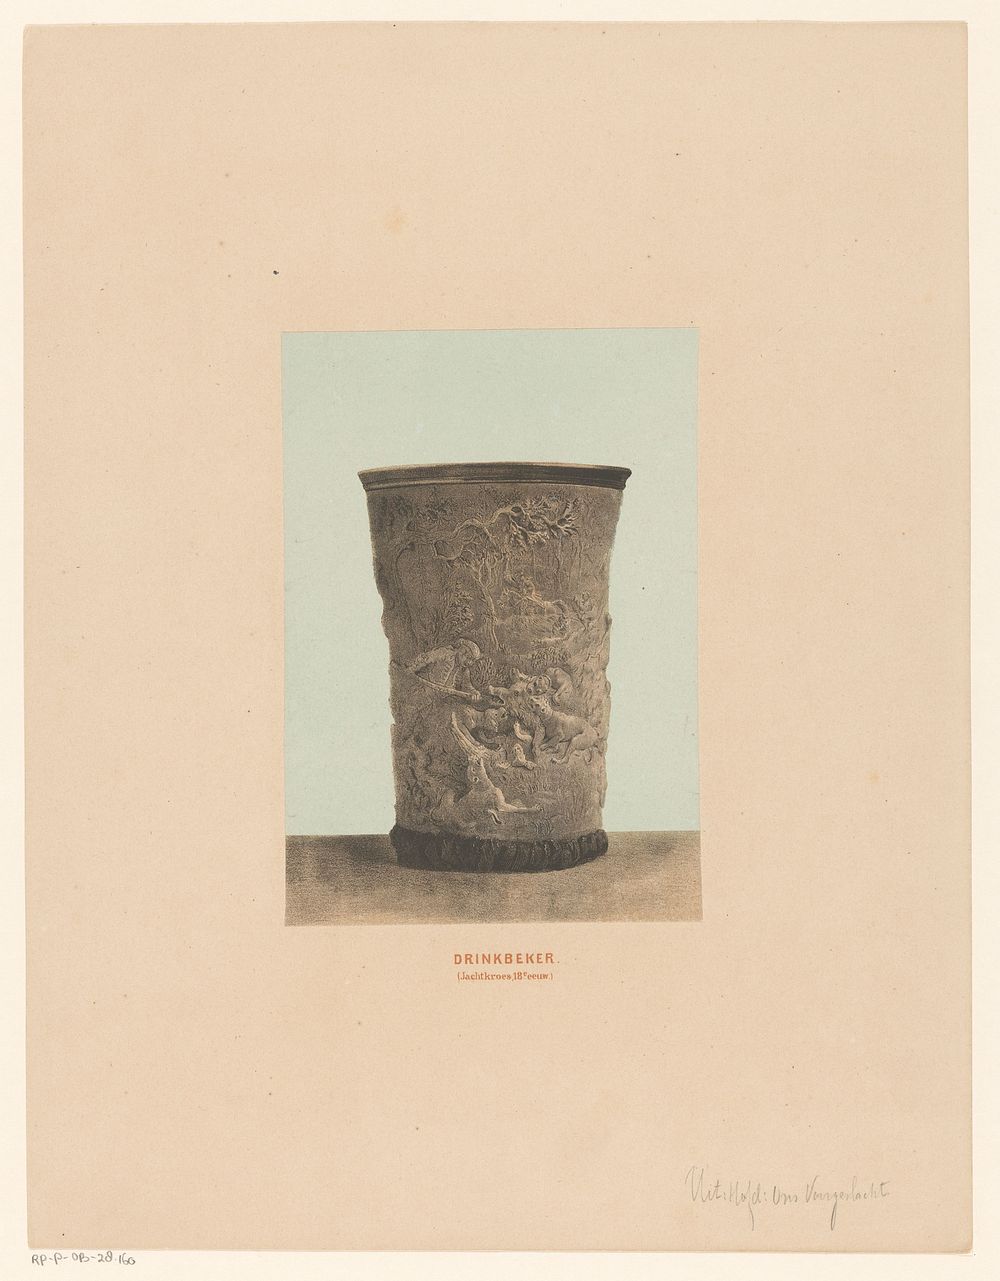 Drinkbeker (1857 - 1864) by anonymous and A C Kruseman